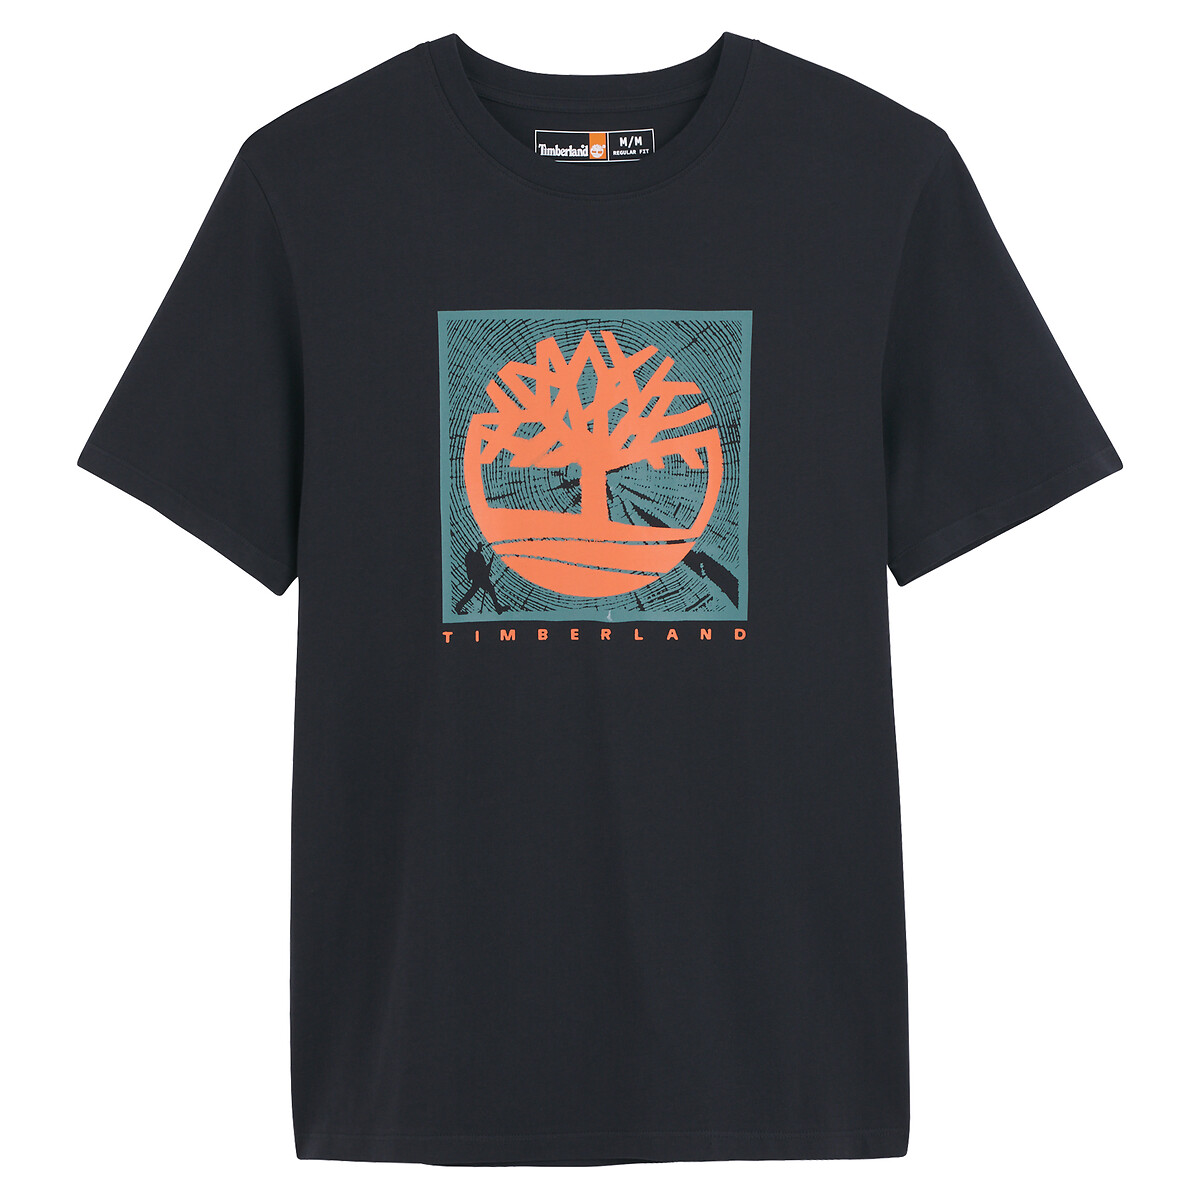 Timberland T-Shirt "Short Sleeve Front Graphic Tee"